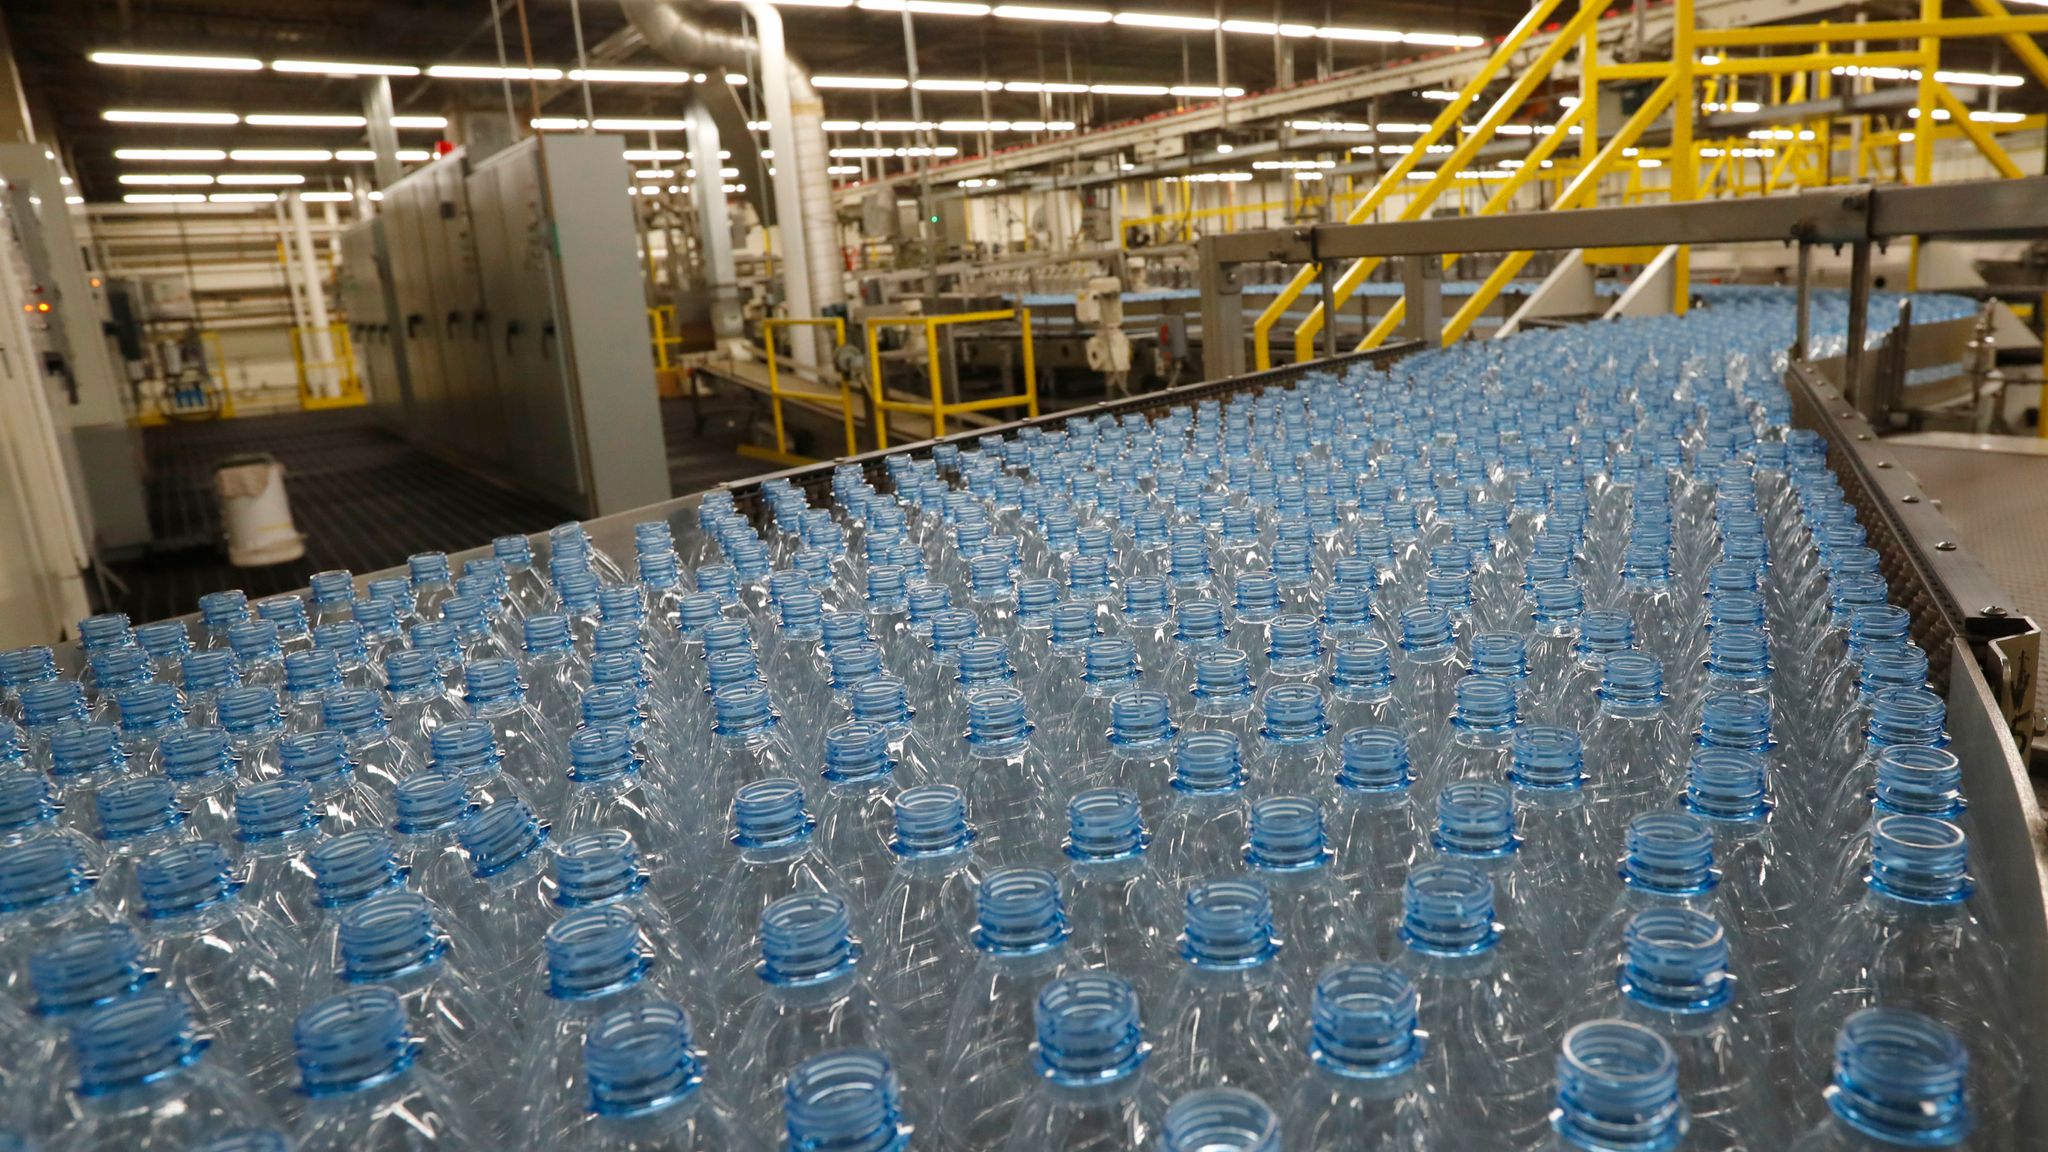 Massive amounts of tiny plastics found in bottled drinking water, study  finds - ABC News